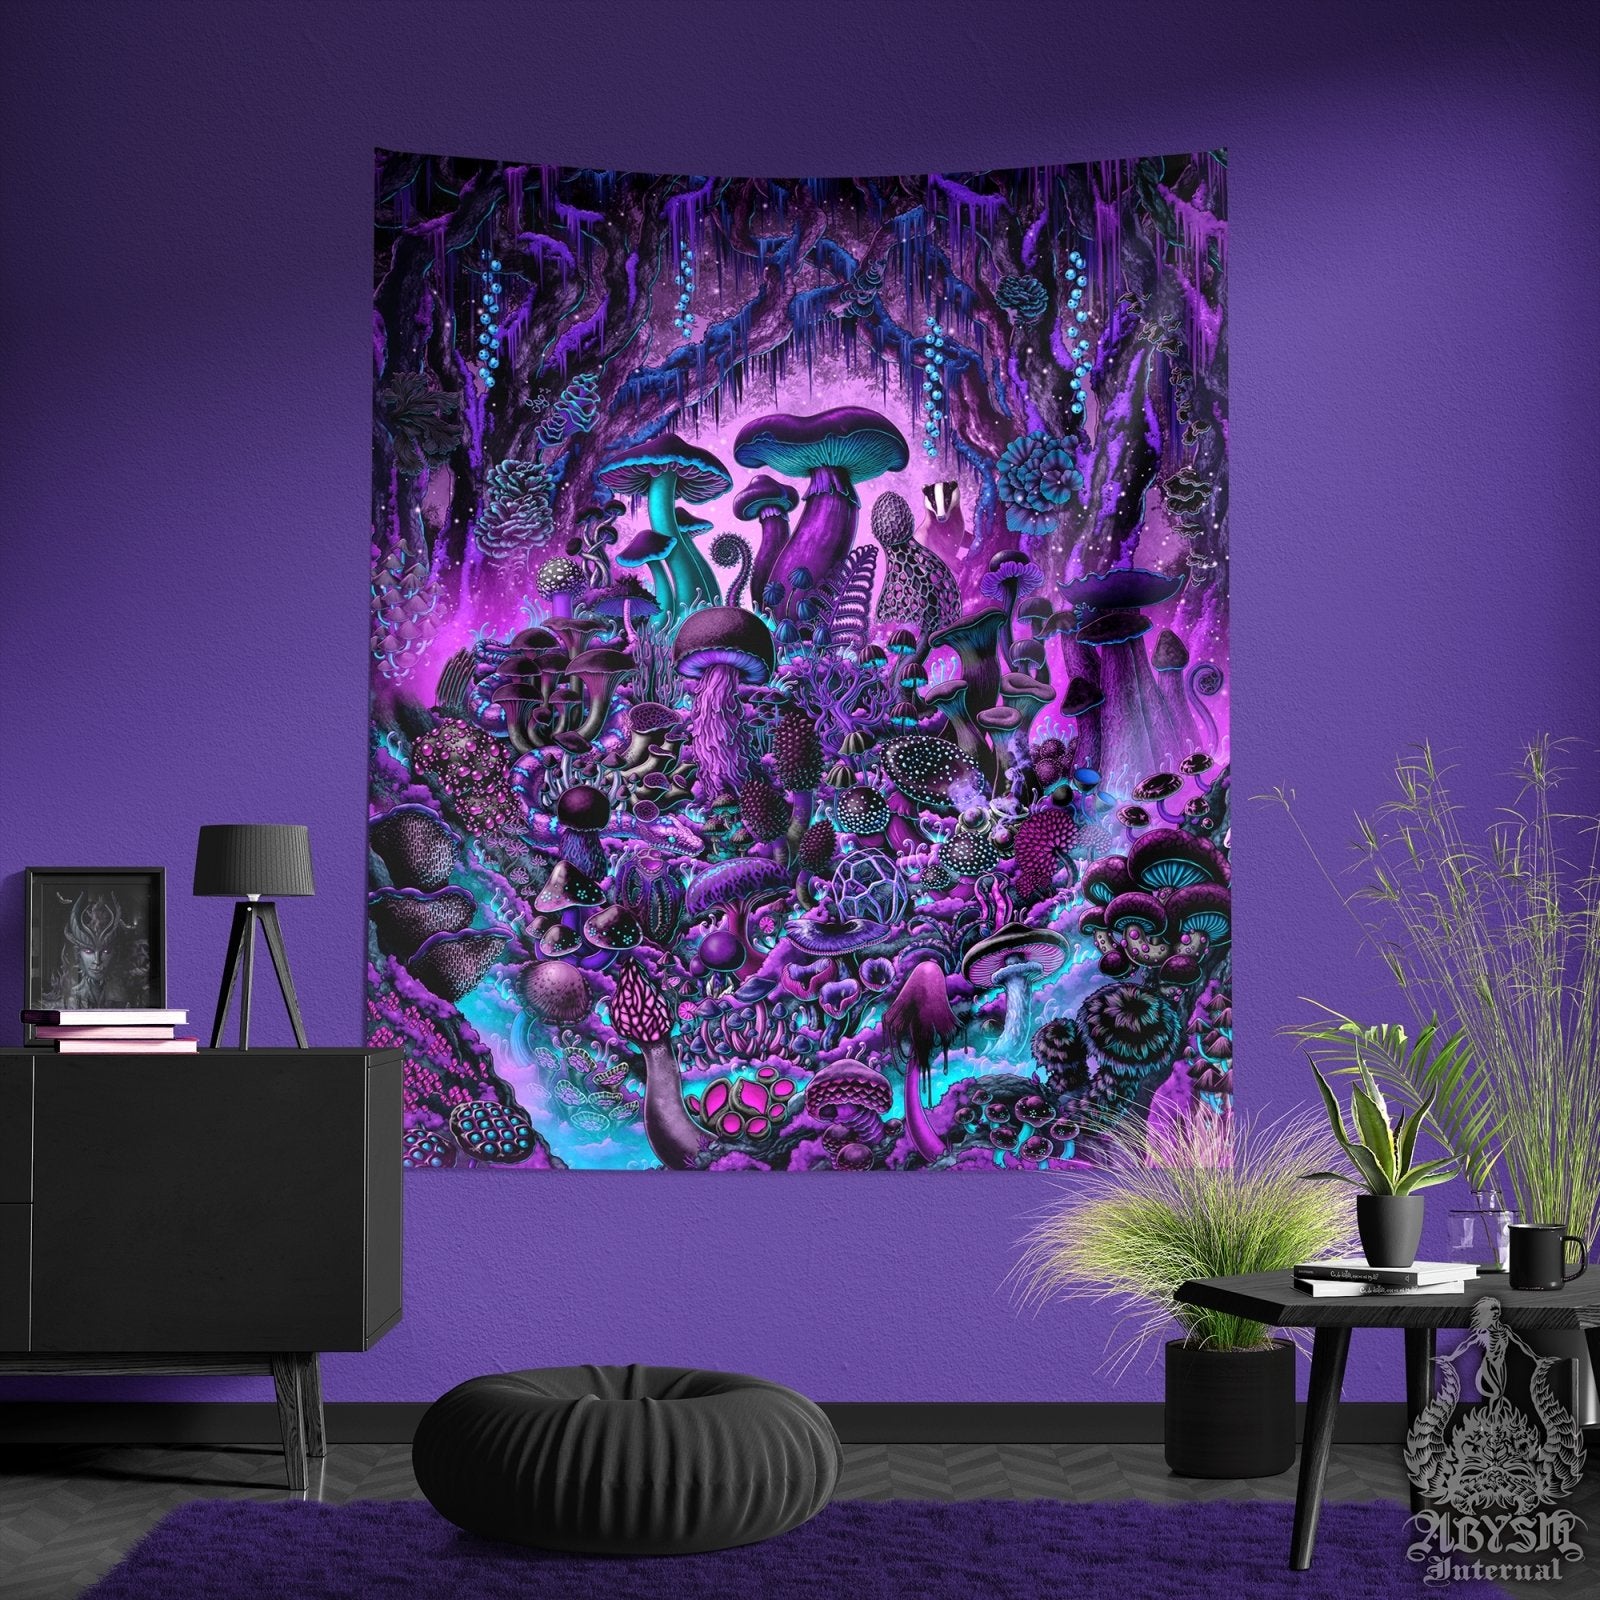 Gothic Mushrooms Tapestry, Mycology Wall Hanging, Pastel Goth Home Decor, Magic Shrooms Art Print, Mycologist Gift - Abysm Internal